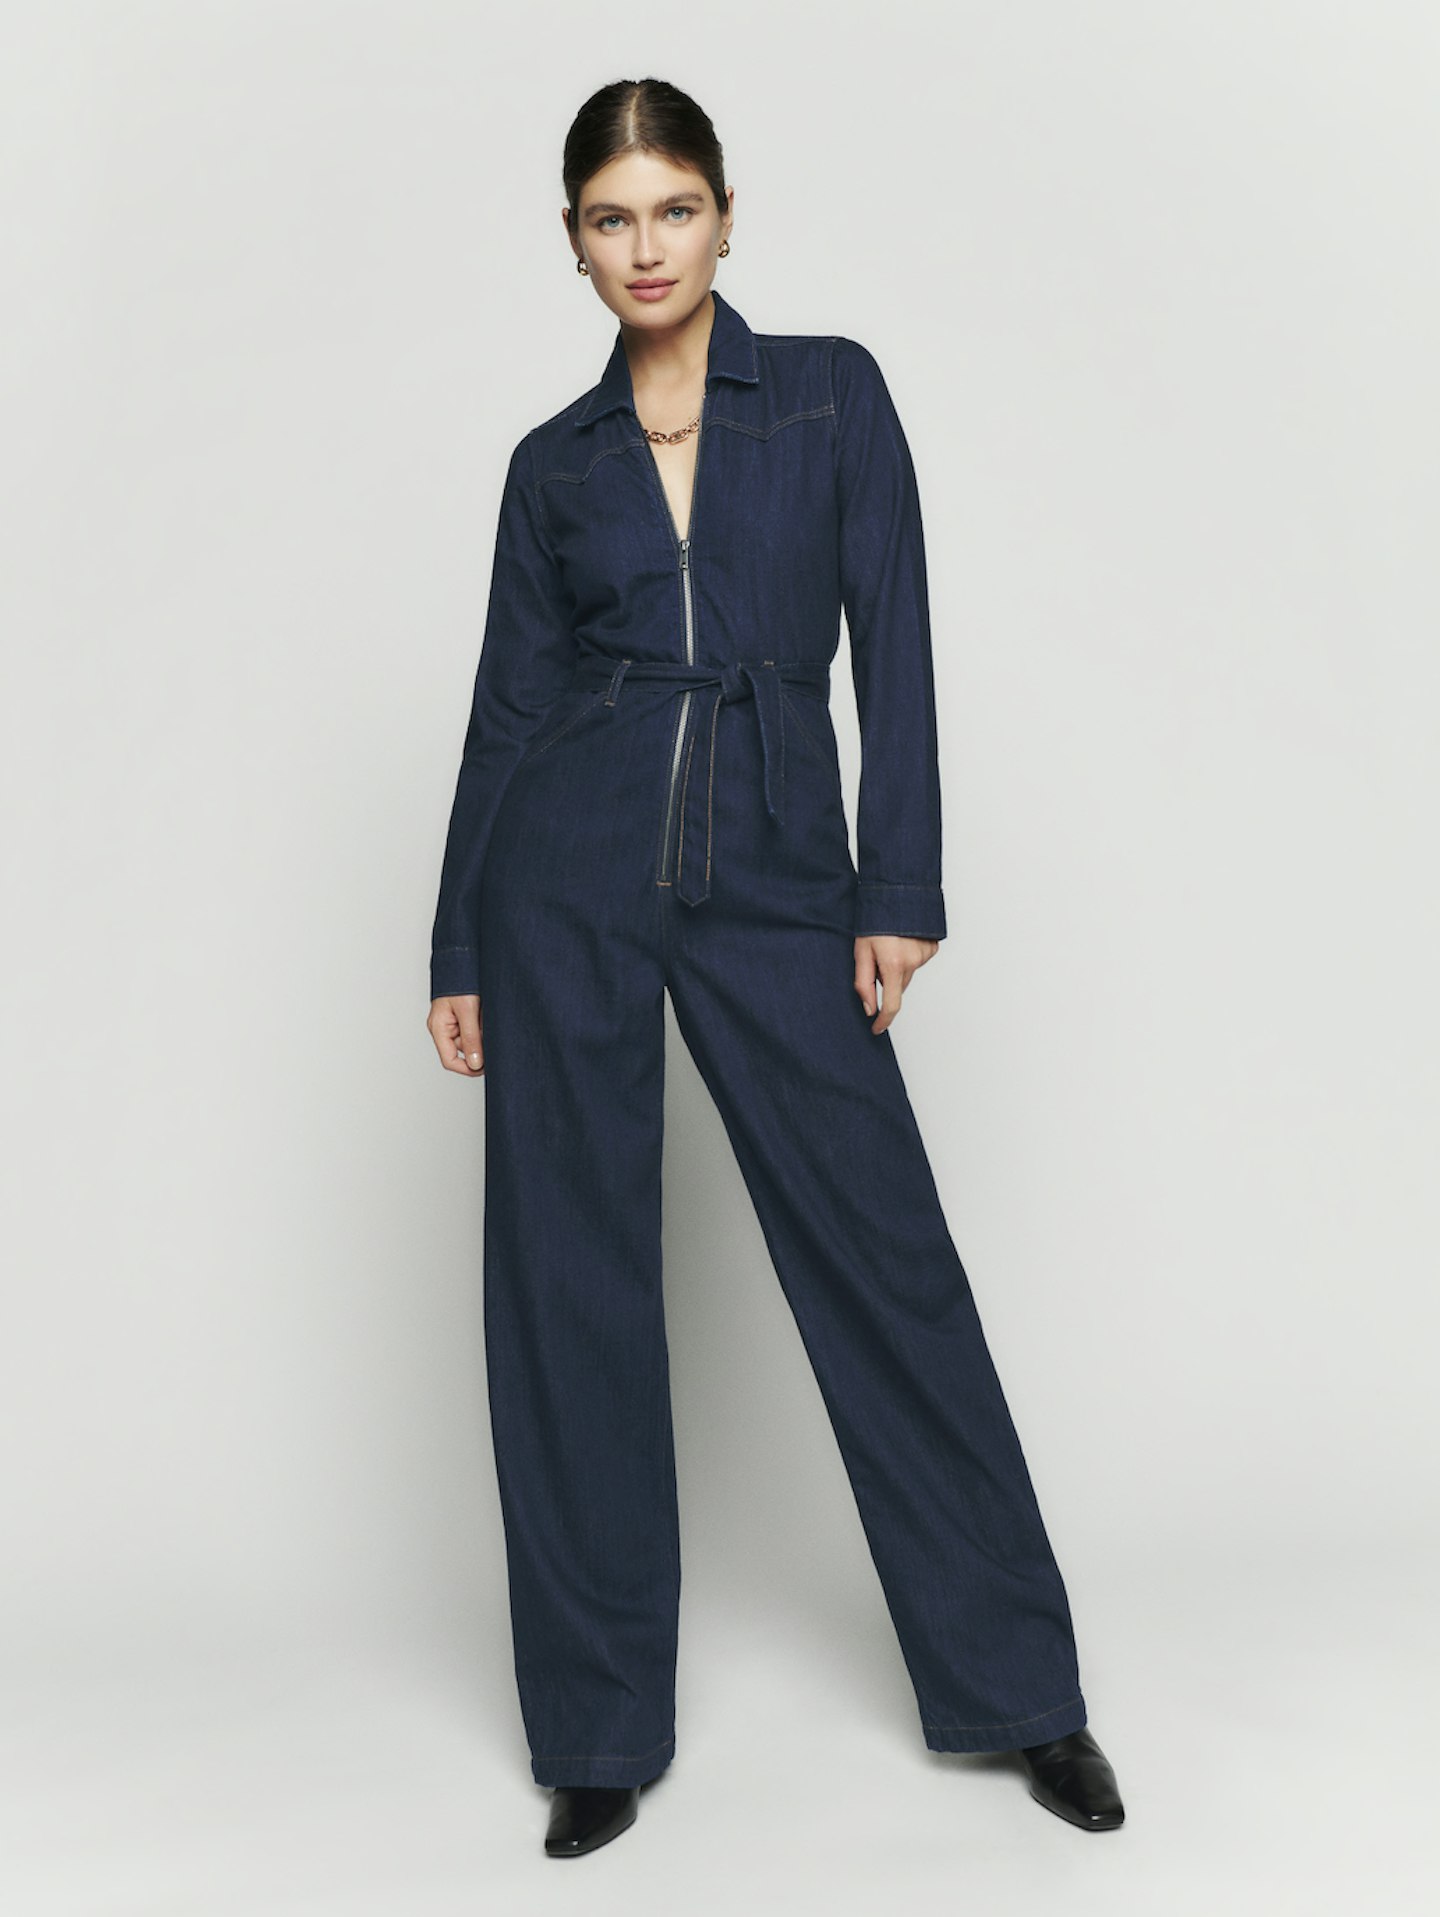 The Best Long-Sleeved Jumpsuits | Fashion | Grazia